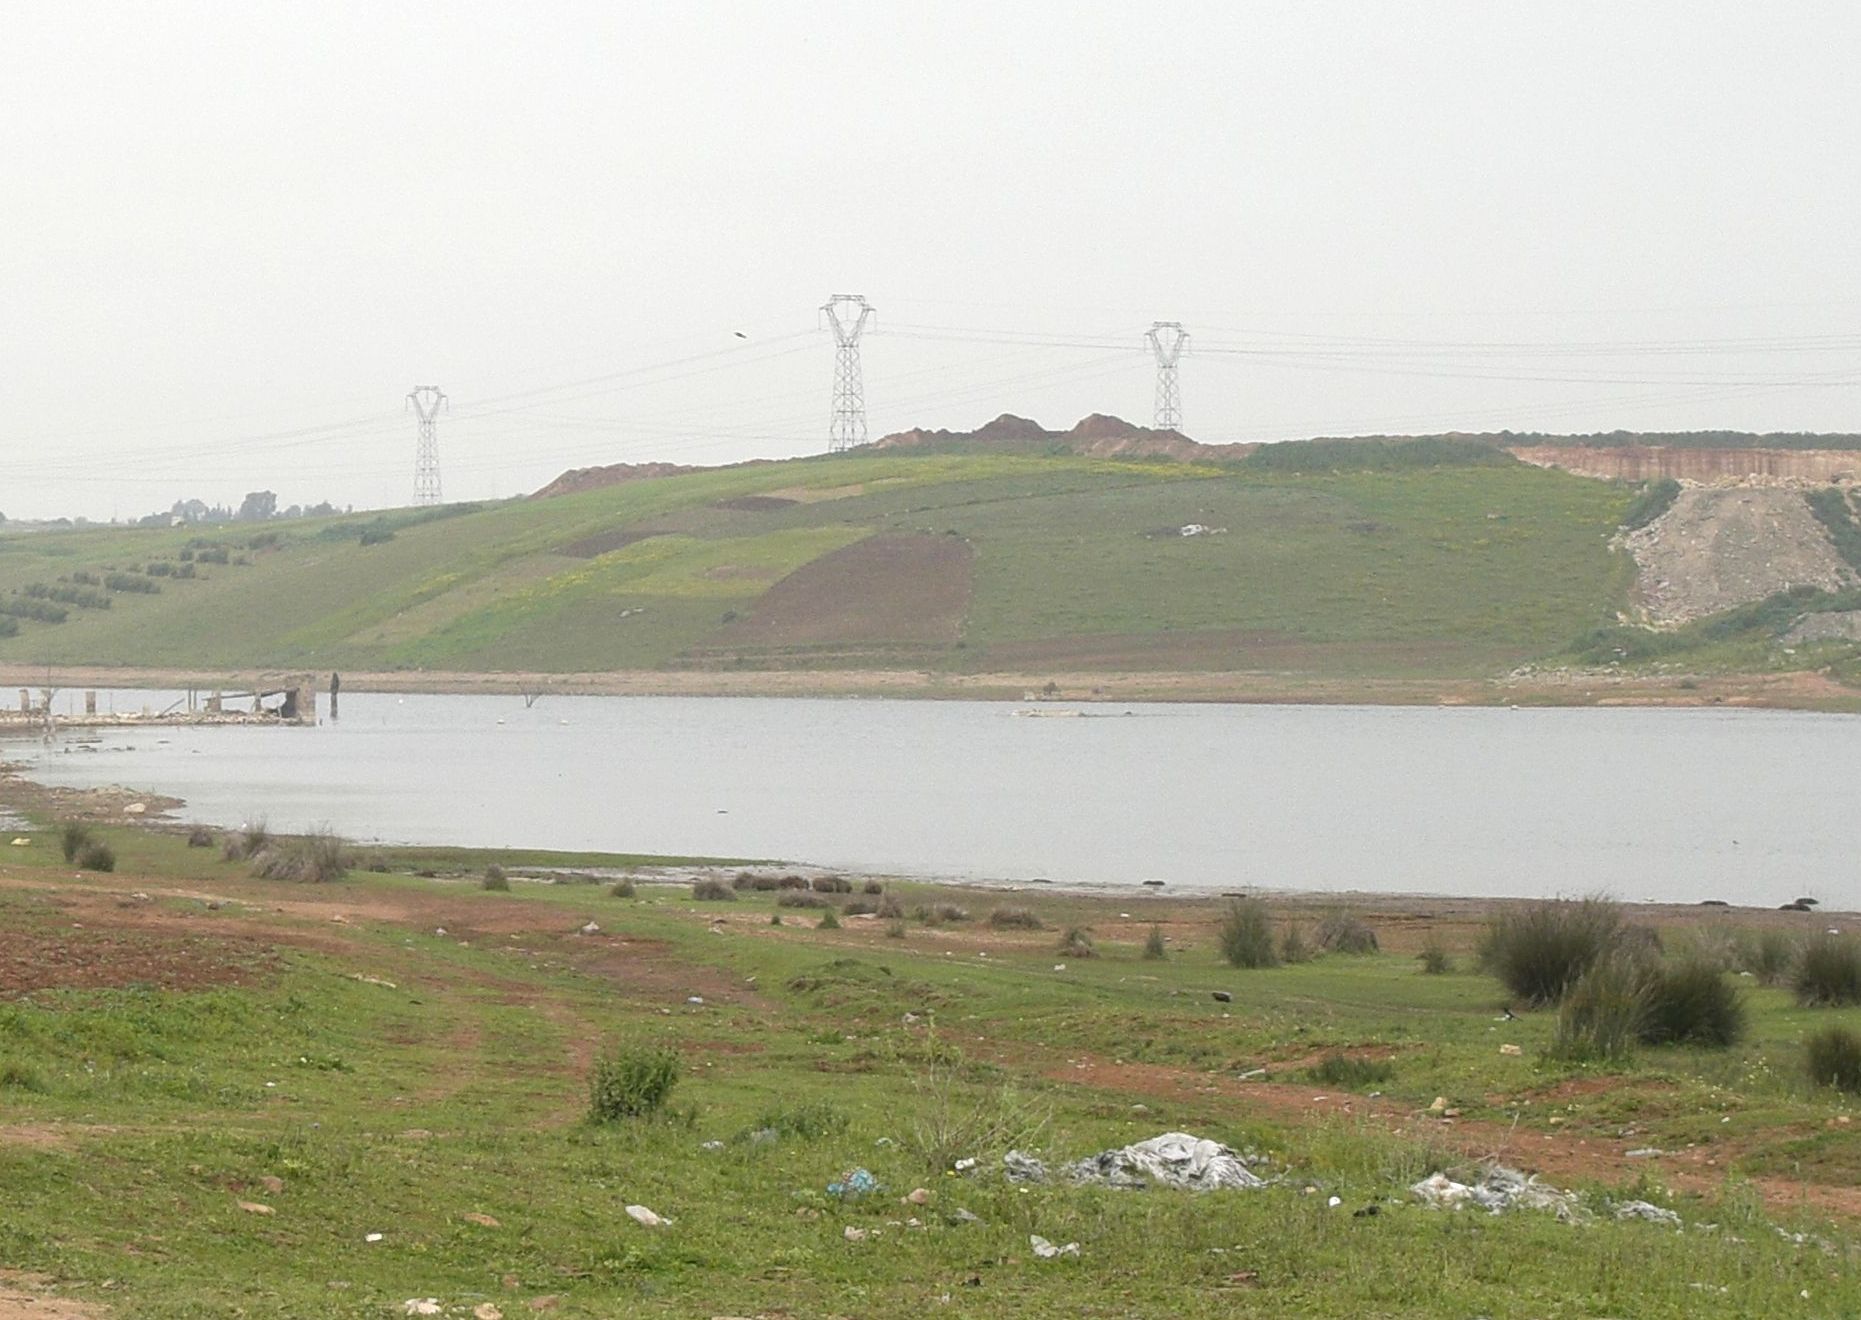 Storage lake in Ouled Ahmed